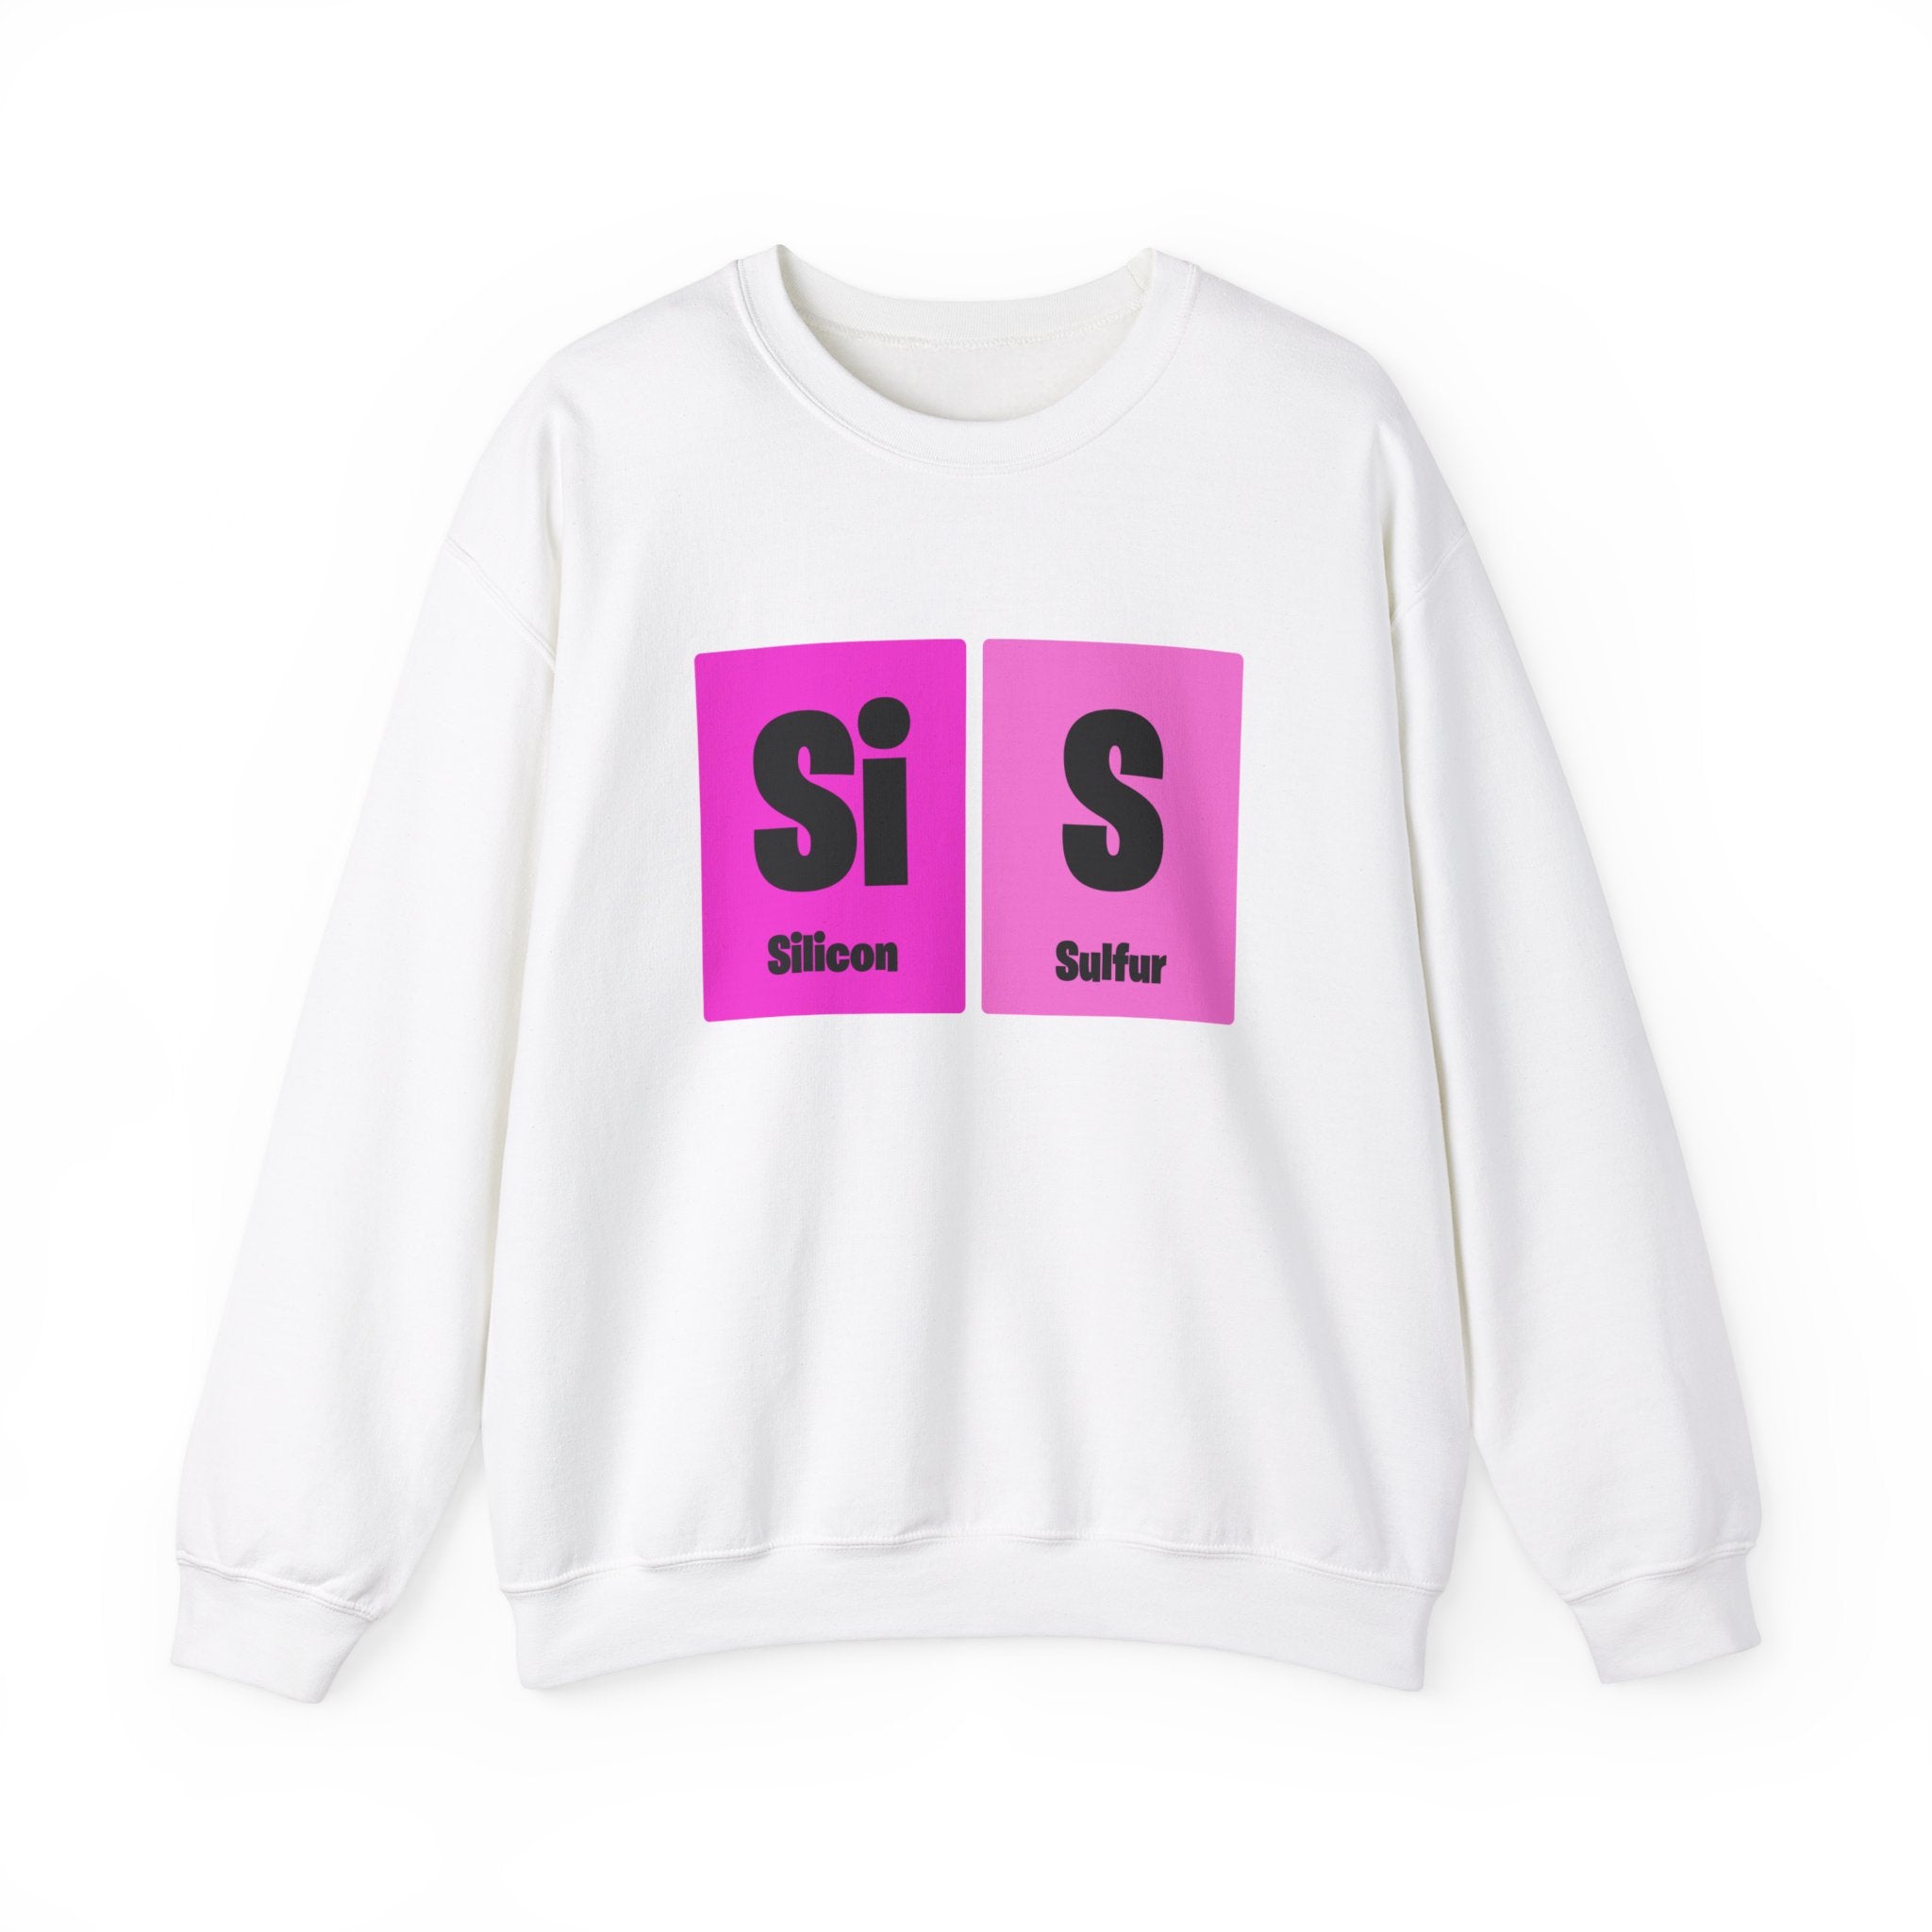 White sweatshirt with a fashionable design featuring two periodic table elements, Silicon (Si) and Sulfur (S), displayed in pink rectangles across the chest, reminiscent of a stylish Si-S Light Pendant - Sweatshirt.